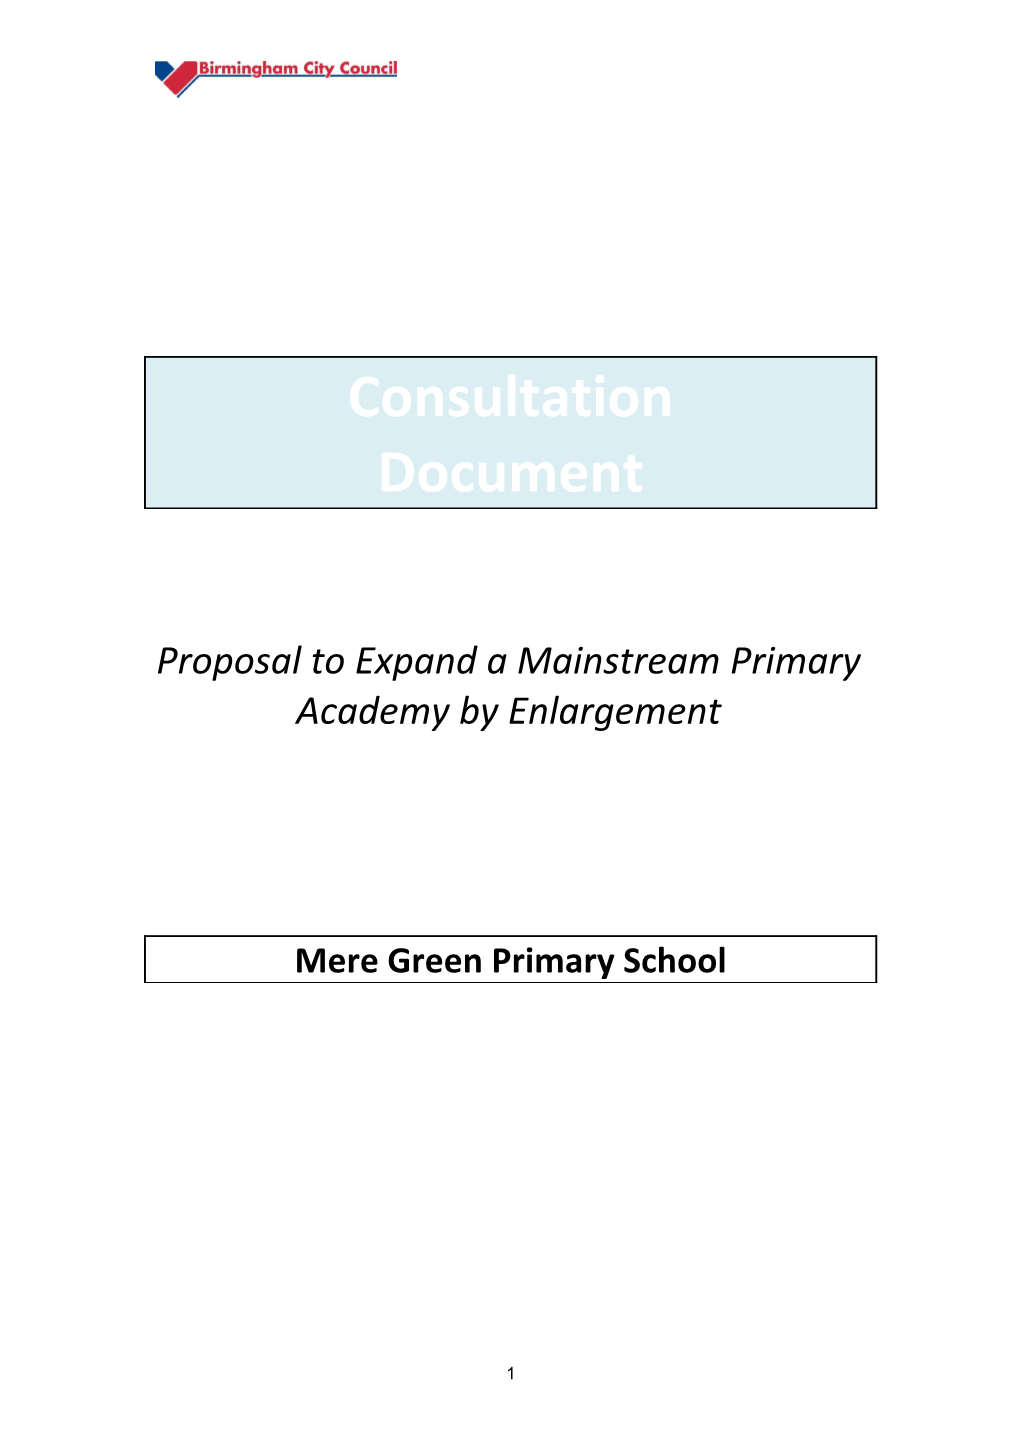 Proposal to Expand a Mainstream Primary Academy by Enlargement